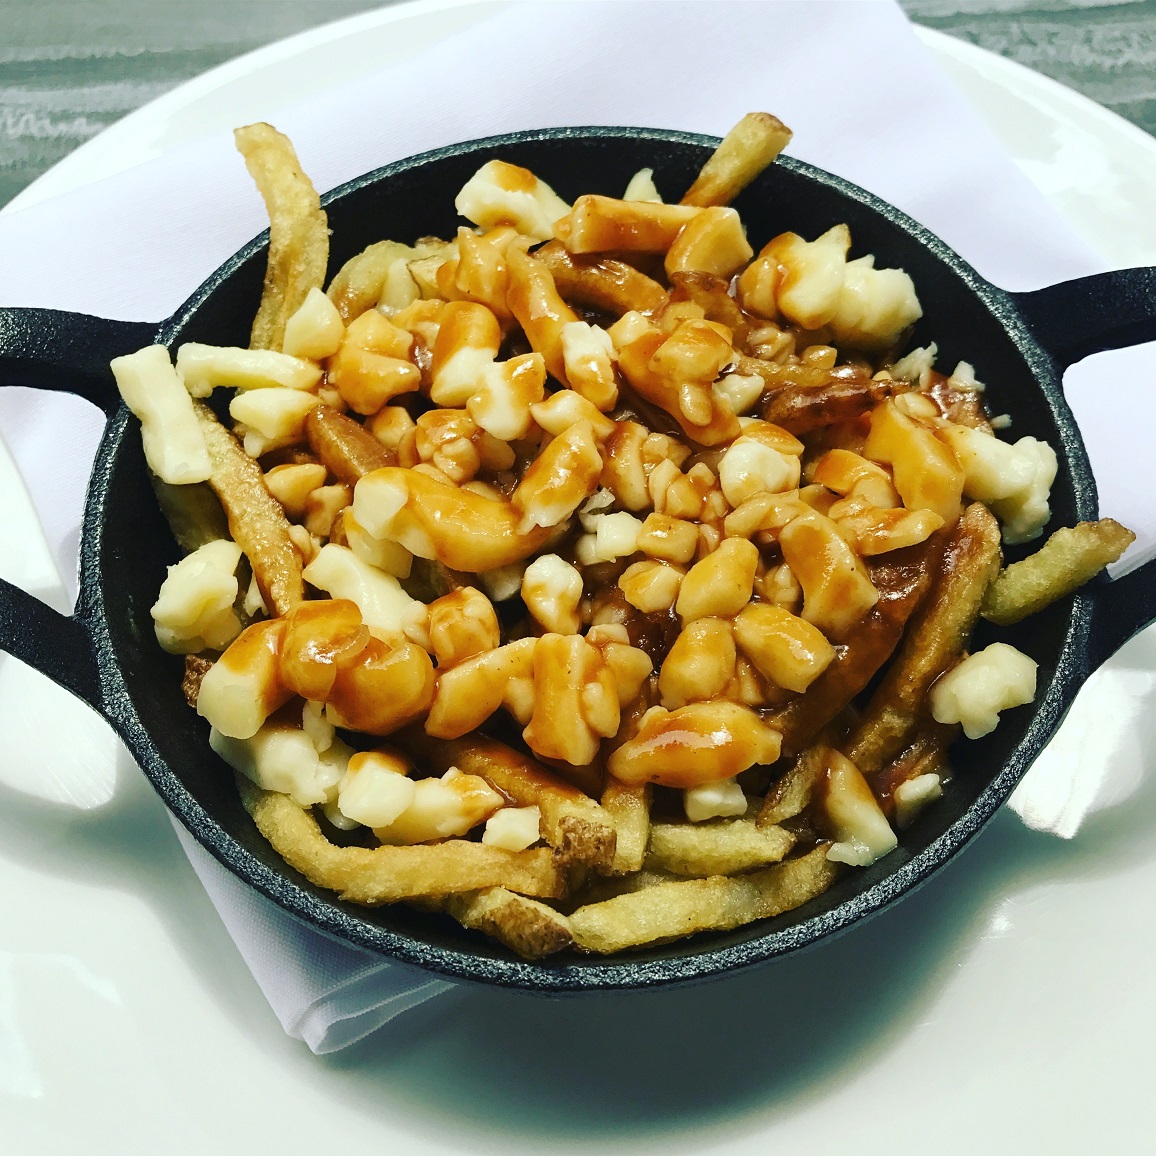 French fries and cheese curds topped with gravy, or how the locals like to call it, Poutine.